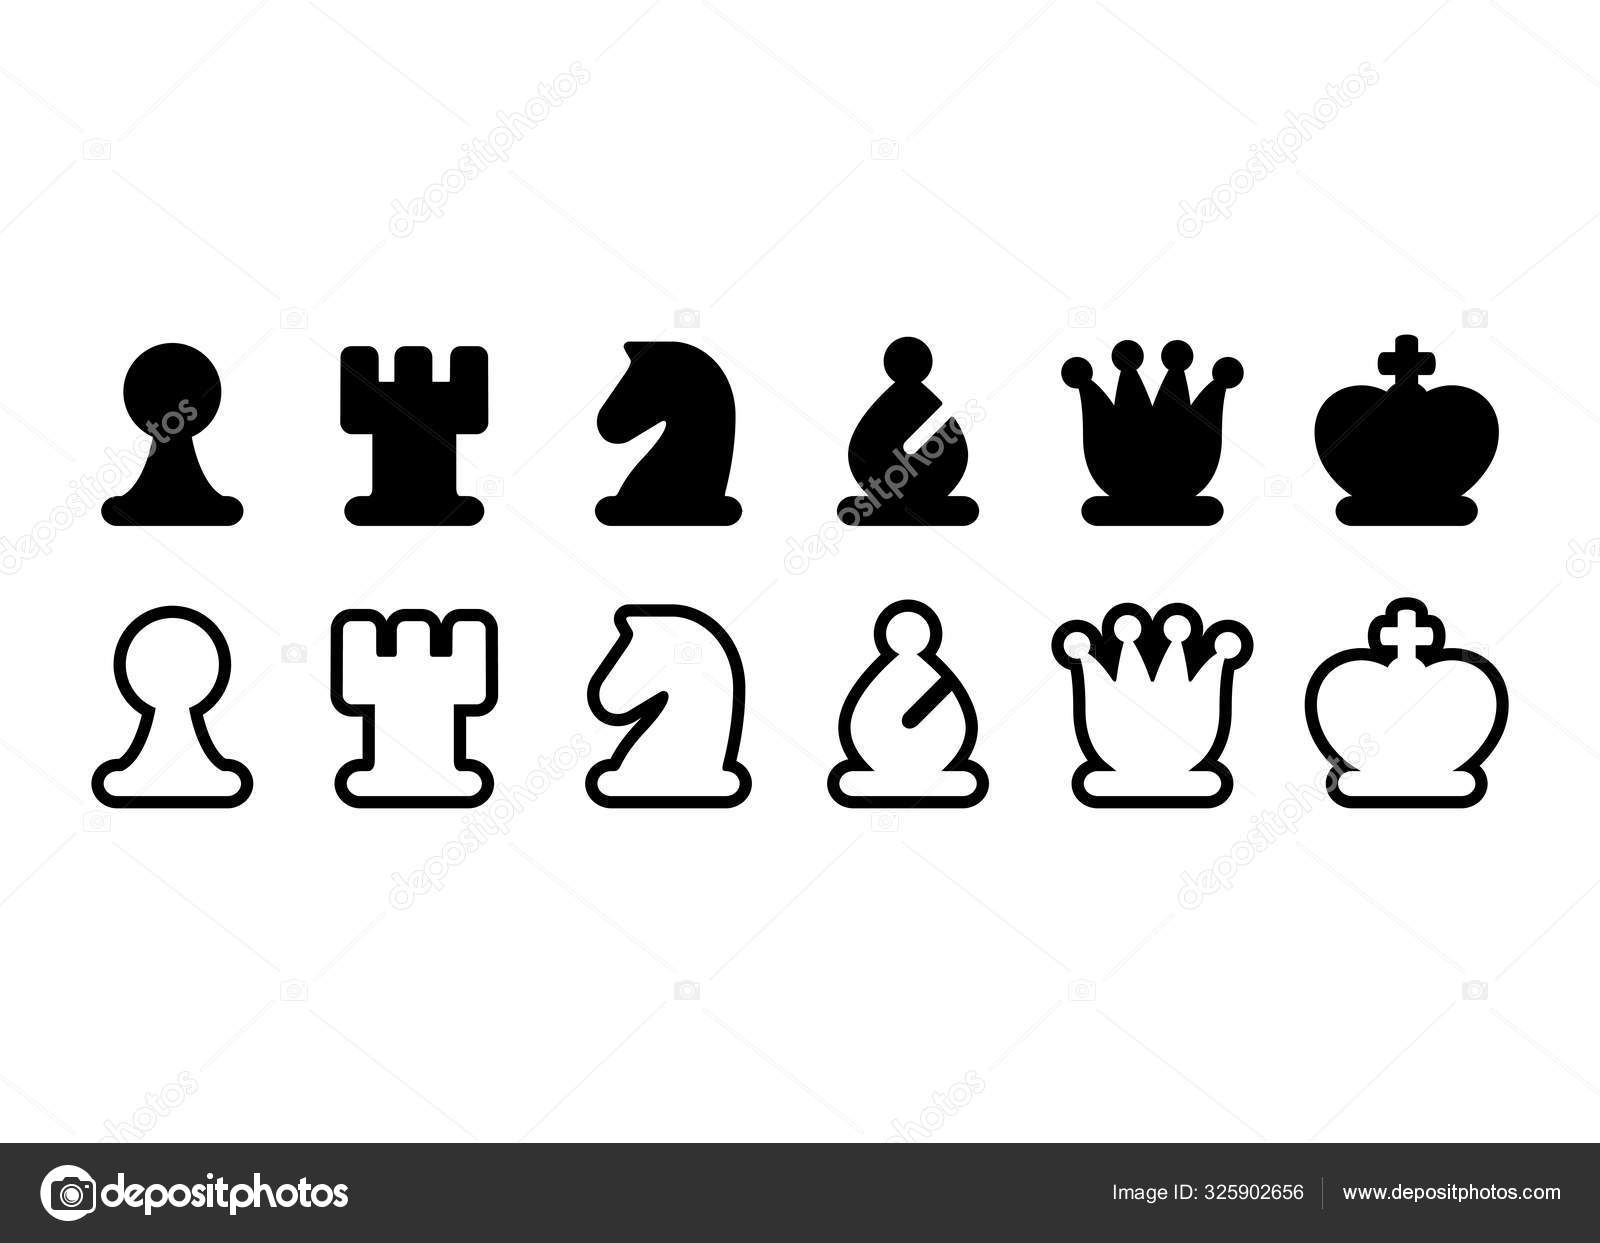 Cartoon black and white chess pieces icons. Flat chessmen, queen